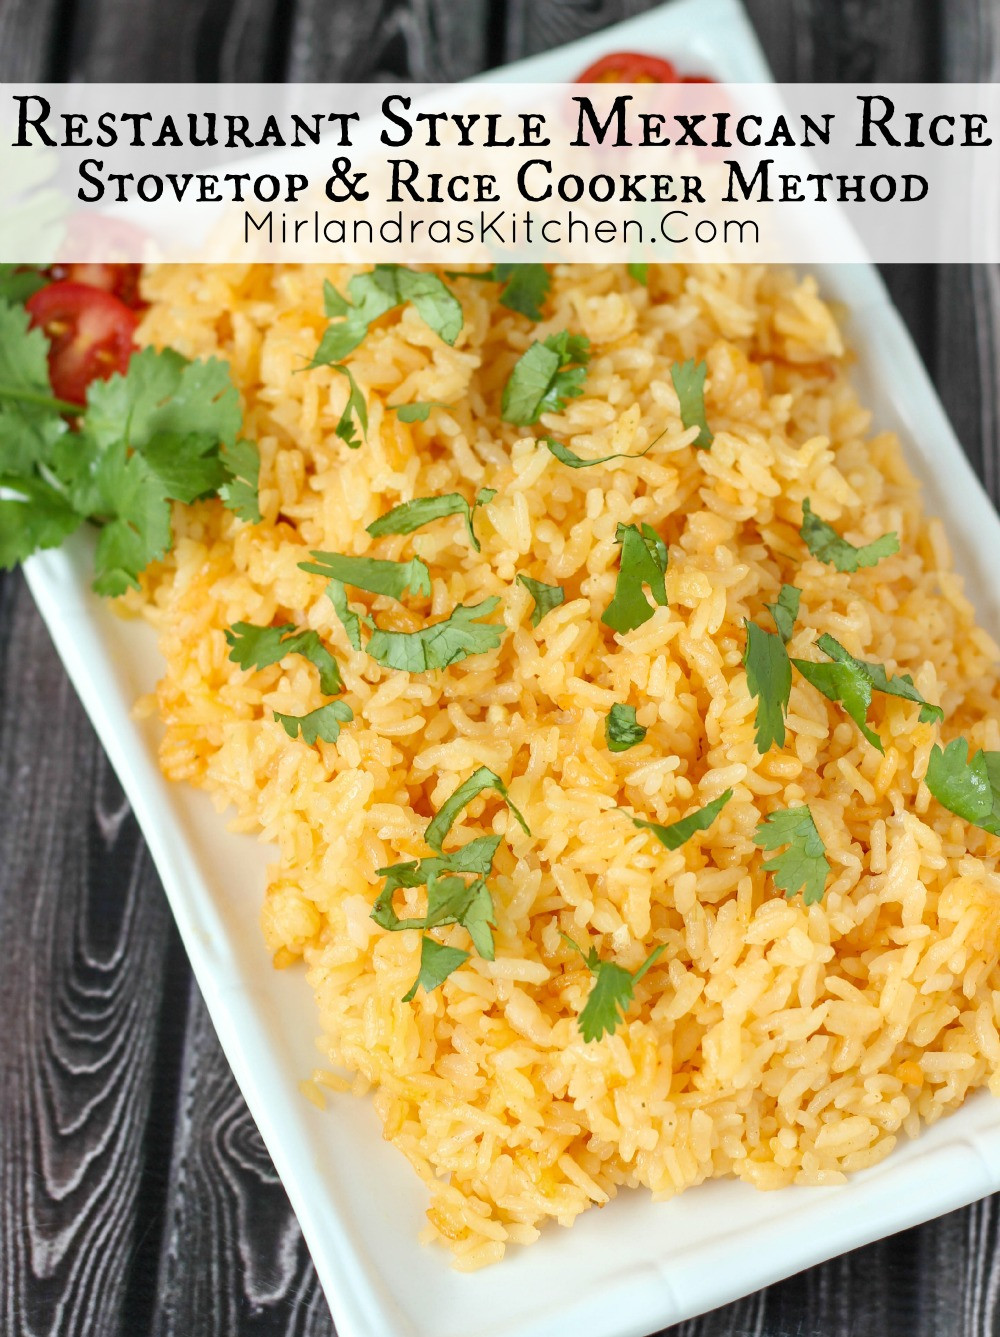 Mexican Restaurant Rice Recipes
 Restaurant Style Mexican Rice The Stove In A Rice